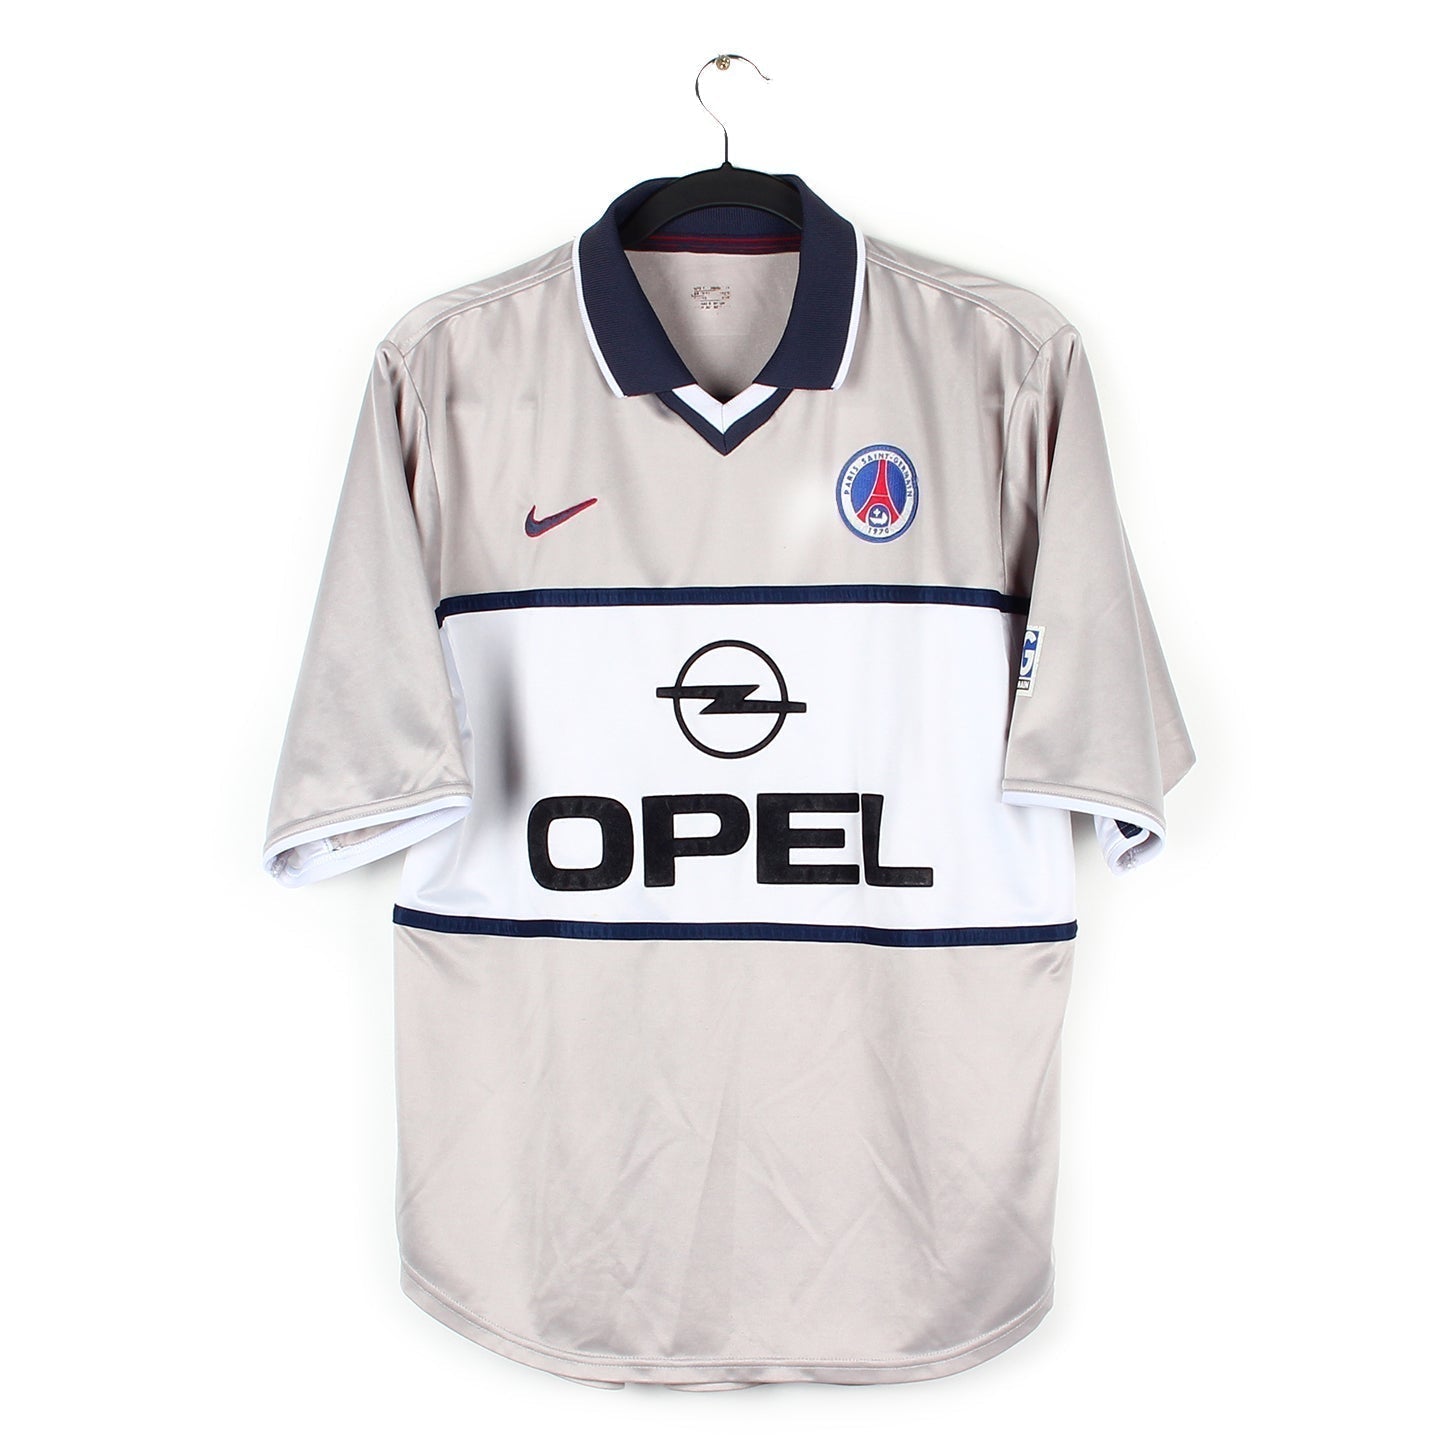 maillot psg vintage opel